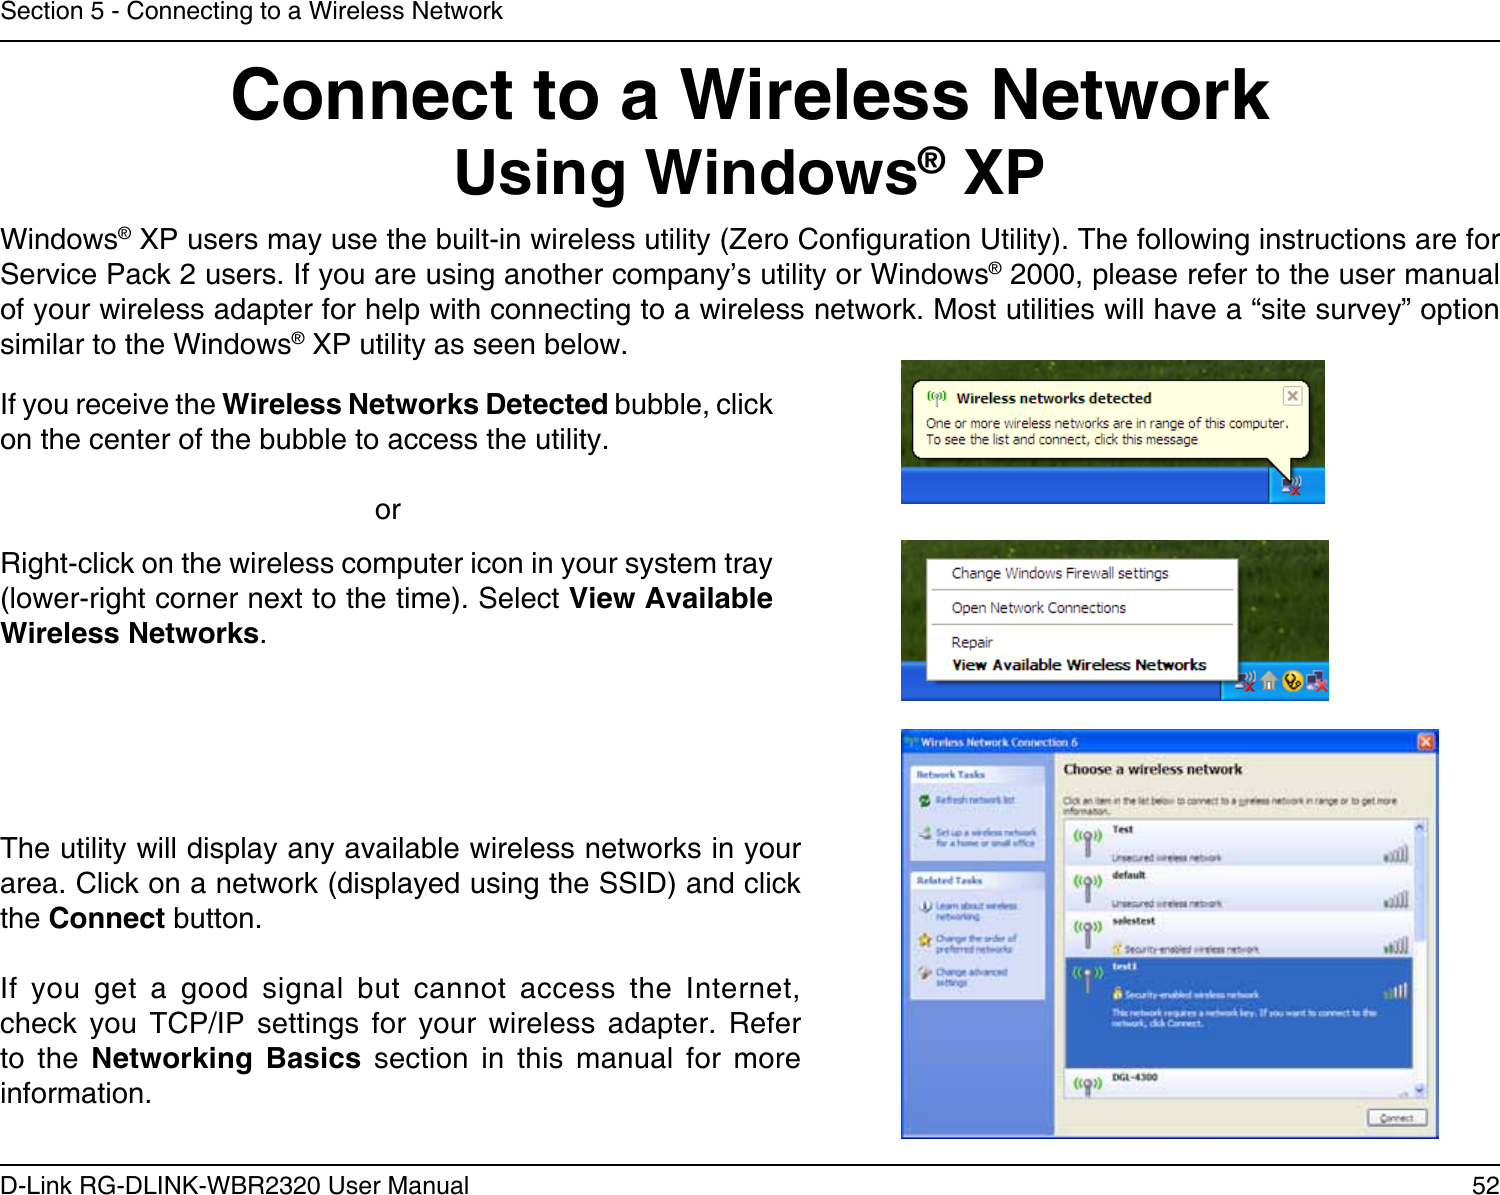 52D-Link RG-DLINK-WBR2320 User ManualSection 5 - Connecting to a Wireless NetworkConnect to a Wireless NetworkUsing Windows® XPWindows® XP users may use the built-in wireless utility (Zero Conguration Utility). The following instructions are for Service Pack 2 users. If you are using another company’s utility or Windows® 2000, please refer to the user manual of your wireless adapter for help with connecting to a wireless network. Most utilities will have a “site survey” option similar to the Windows® XP utility as seen below.Right-click on the wireless computer icon in your system tray (lower-right corner next to the time). Select View Available Wireless Networks.If you receive the Wireless Networks Detected bubble, click on the center of the bubble to access the utility.     orThe utility will display any available wireless networks in your area. Click on a network (displayed using the SSID) and click the Connect button.If  you  get  a  good  signal  but  cannot  access  the  Internet, check  you  TCP/IP  settings  for  your  wireless  adapter.  Refer to  the  Networking  Basics  section  in  this  manual  for  more information.